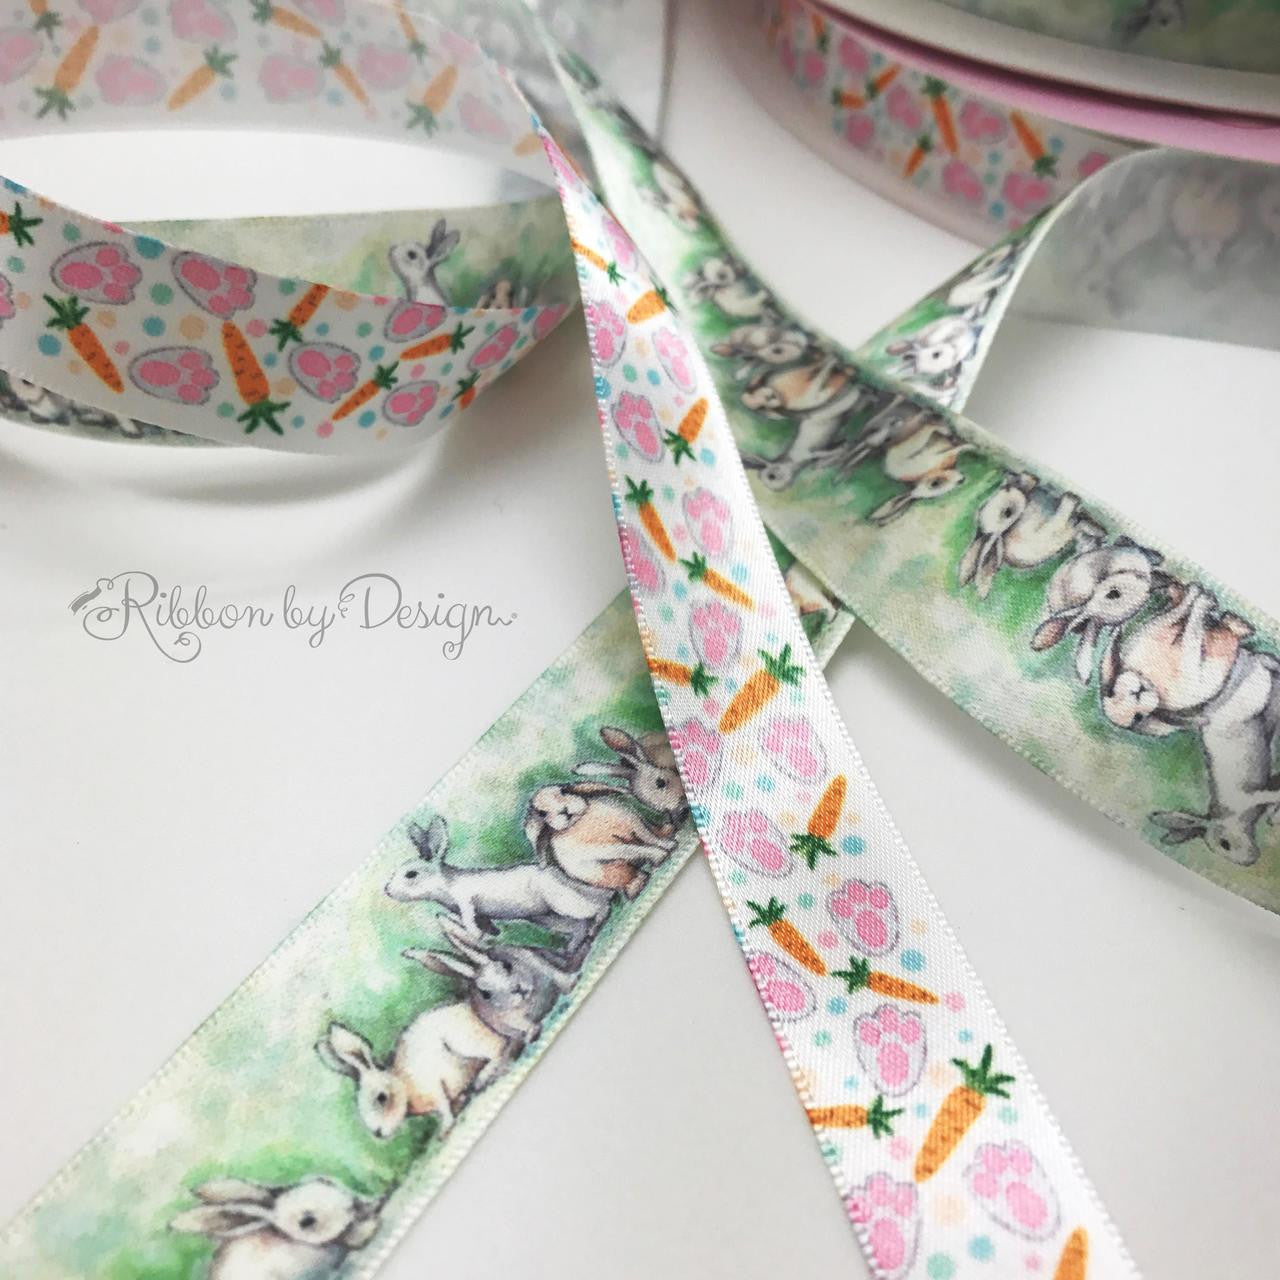 Mixed with our bunny prints and carrots ribbons, these are beautiful finishing touches for your Easter gifts and baskets!